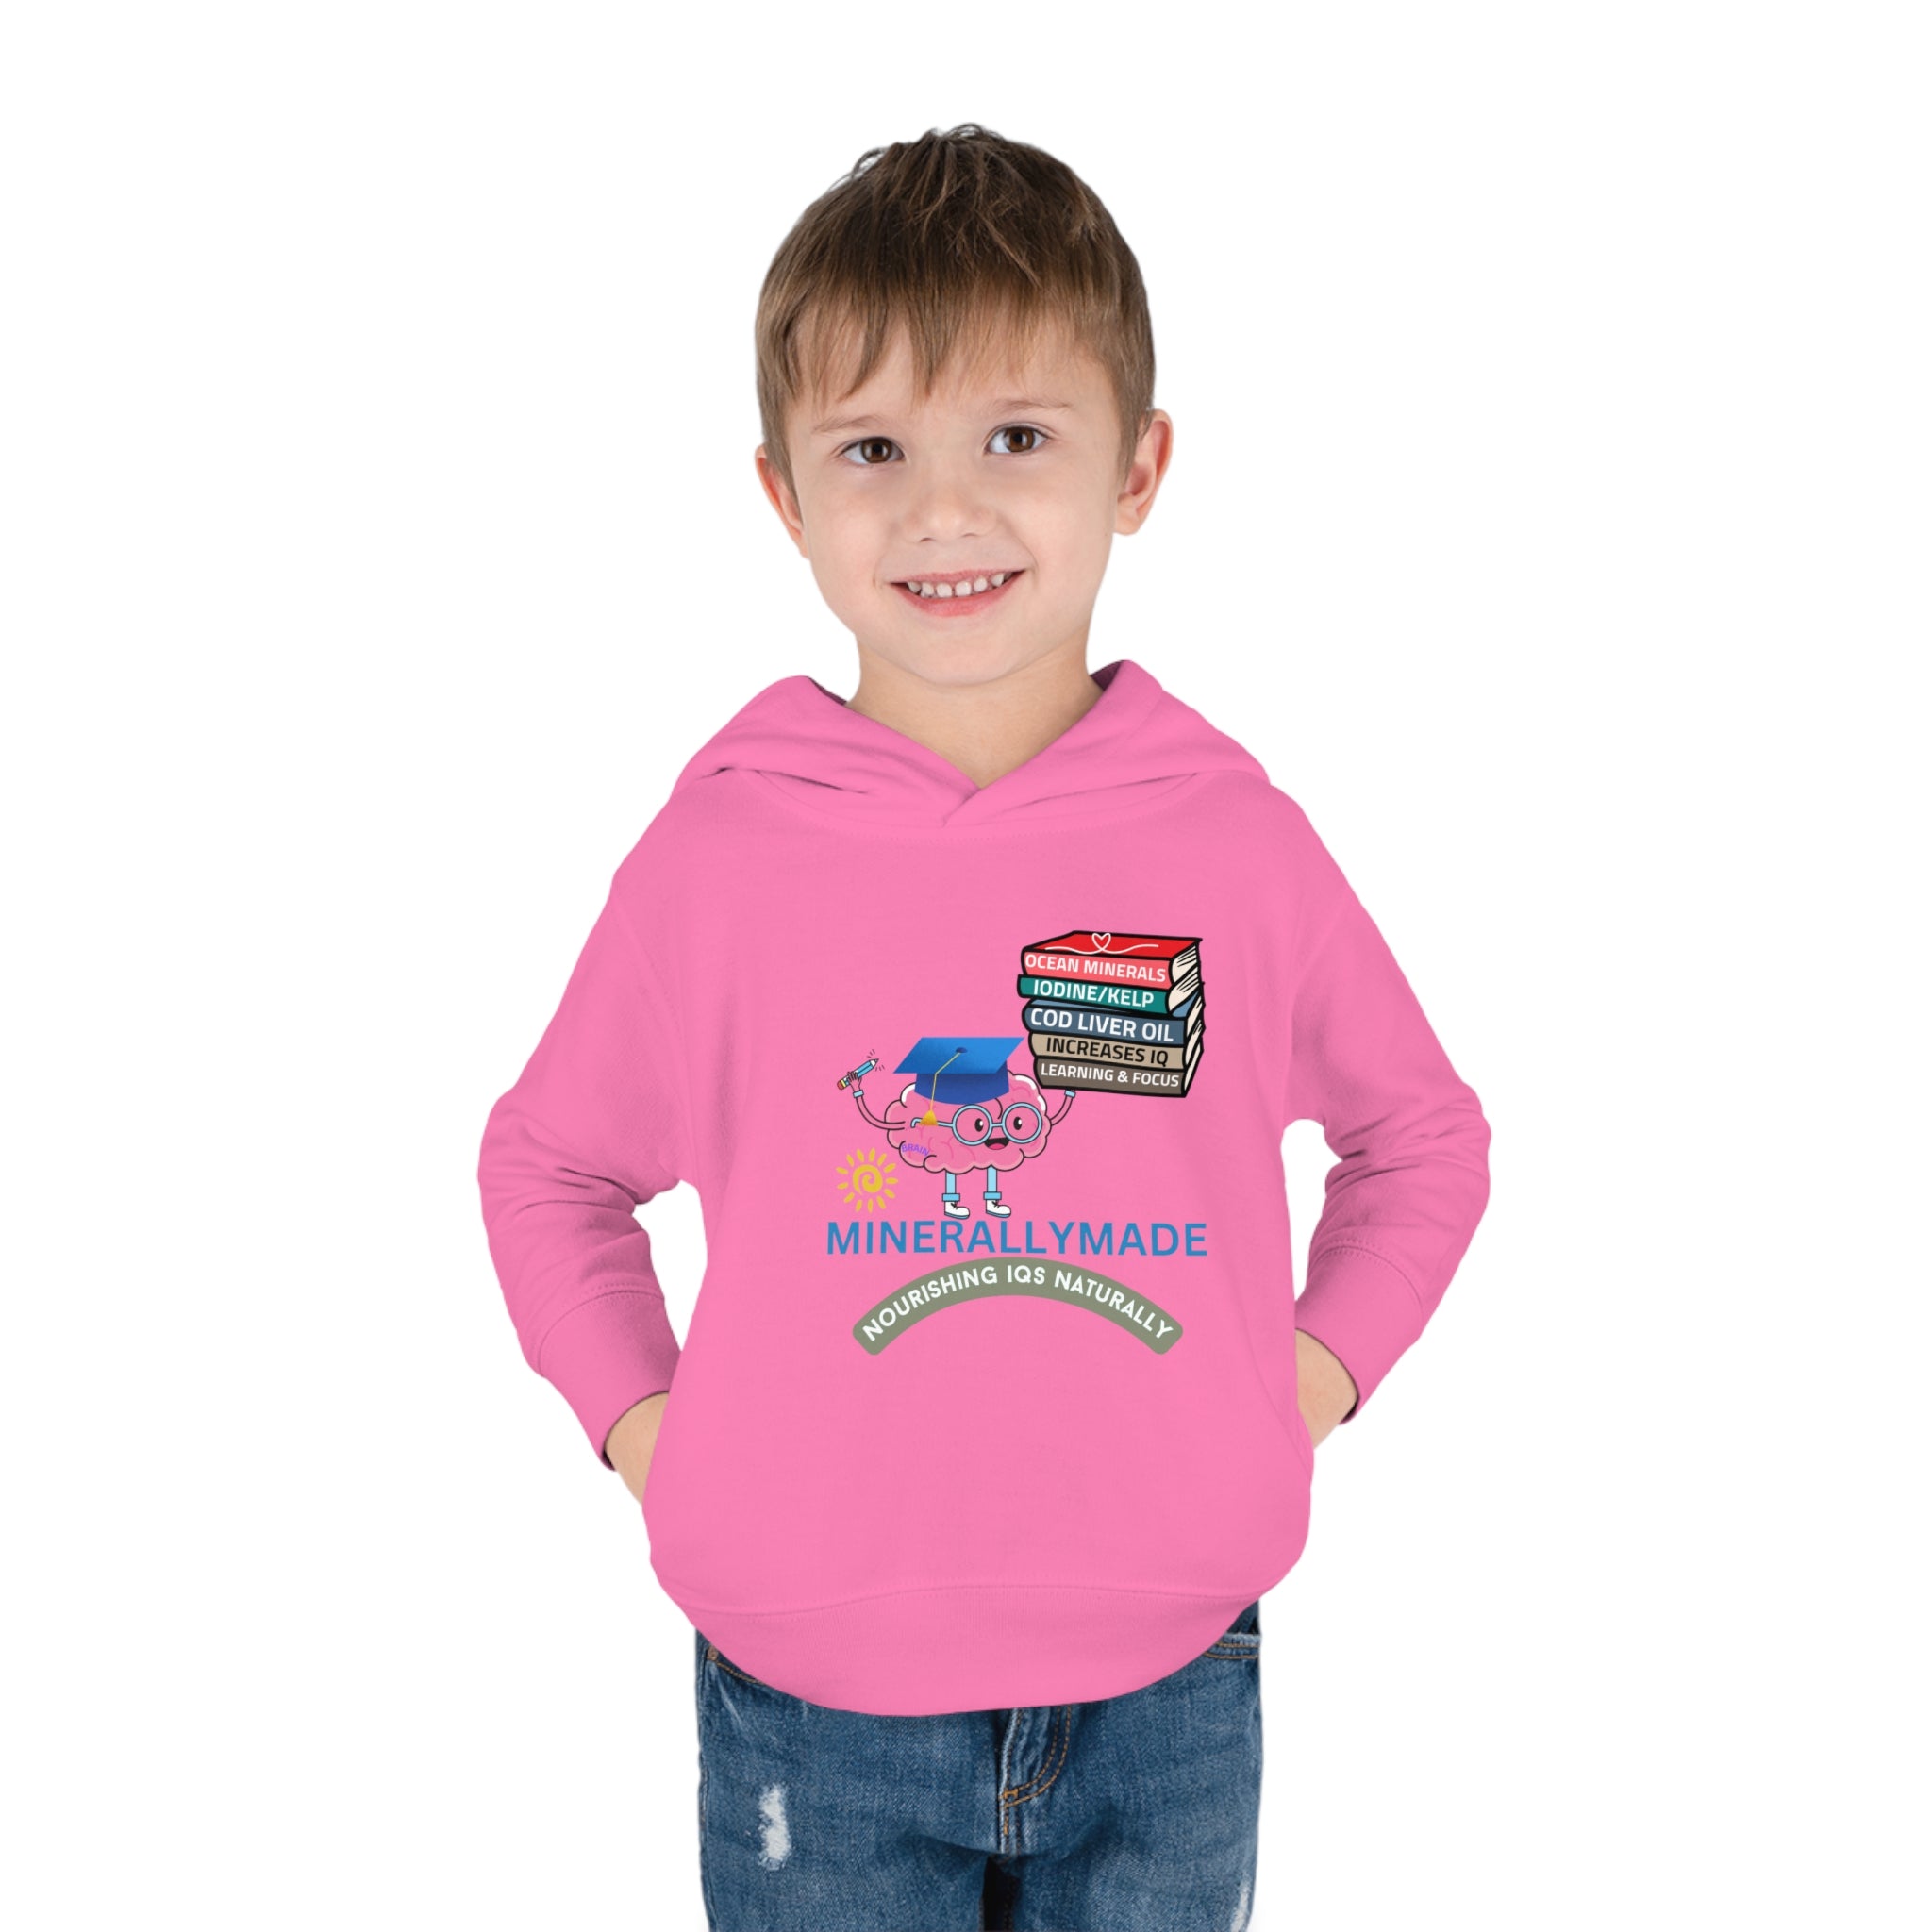 Minerallymade | Nourishing IQs Naturally | Toddler Pullover Fleece Hoodie